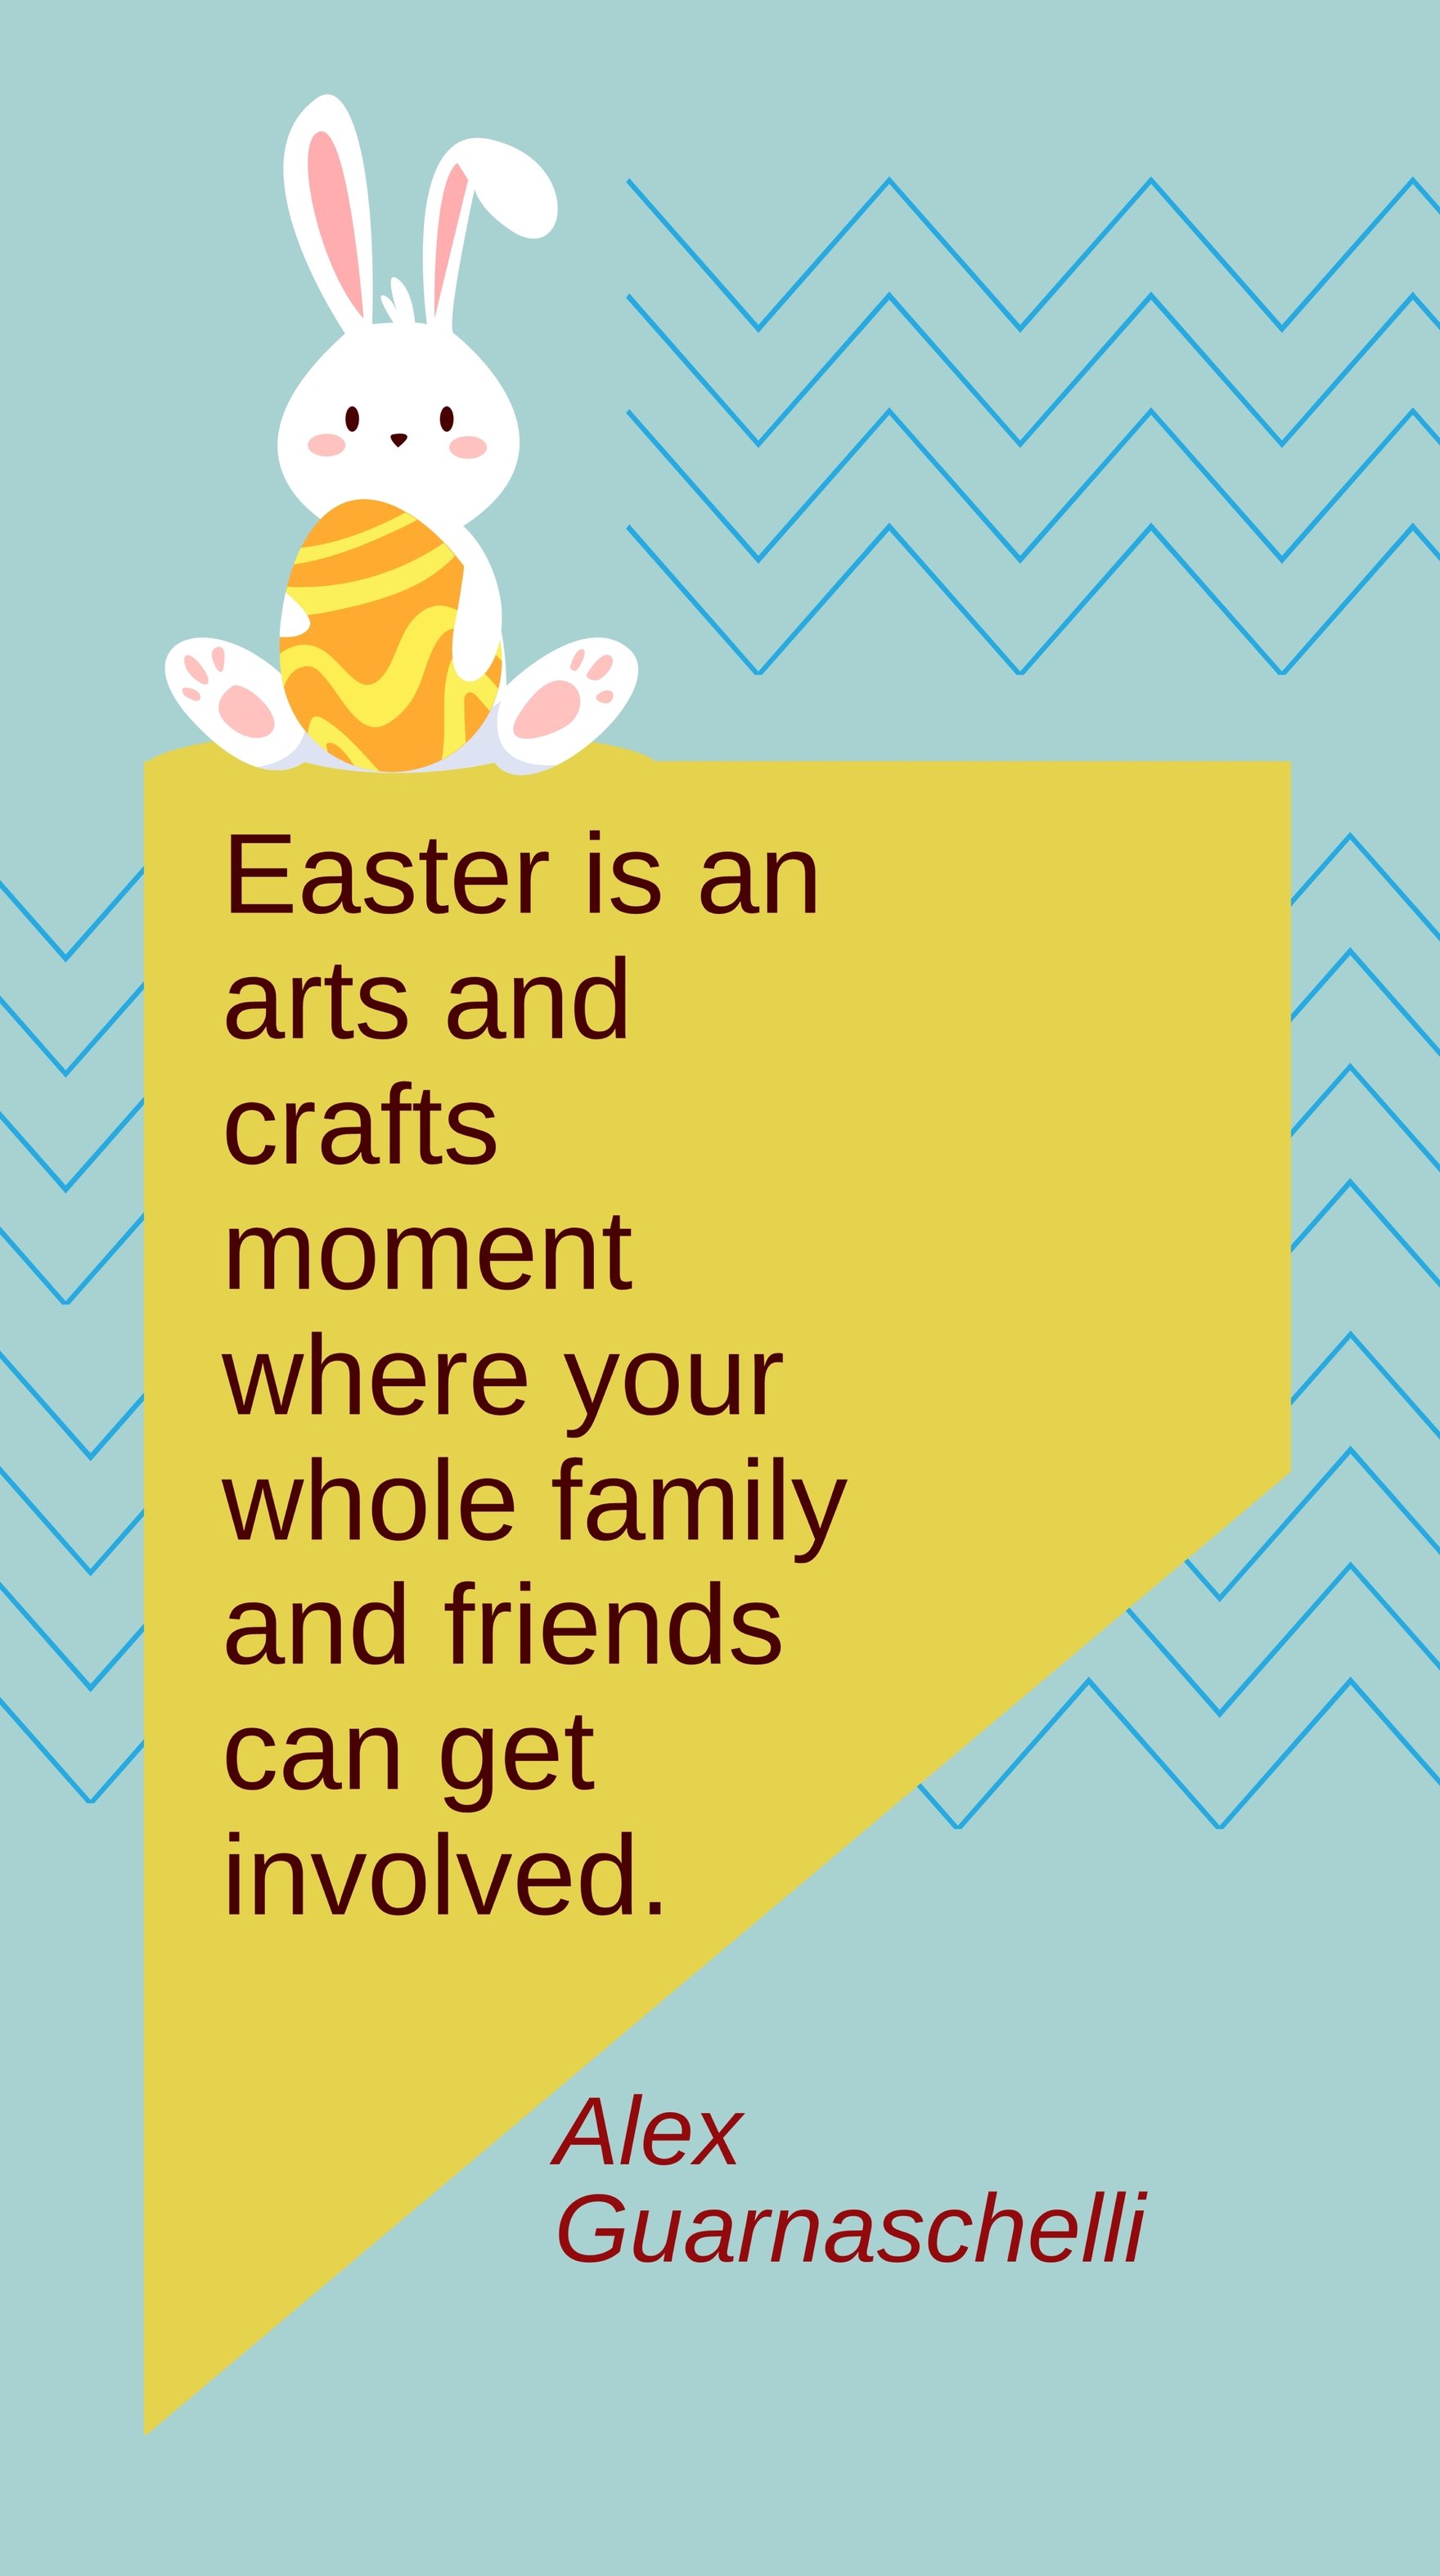 Free Alex Guarnaschelli - Easter is an arts and crafts moment where your whole family and friends can get involved. in JPG